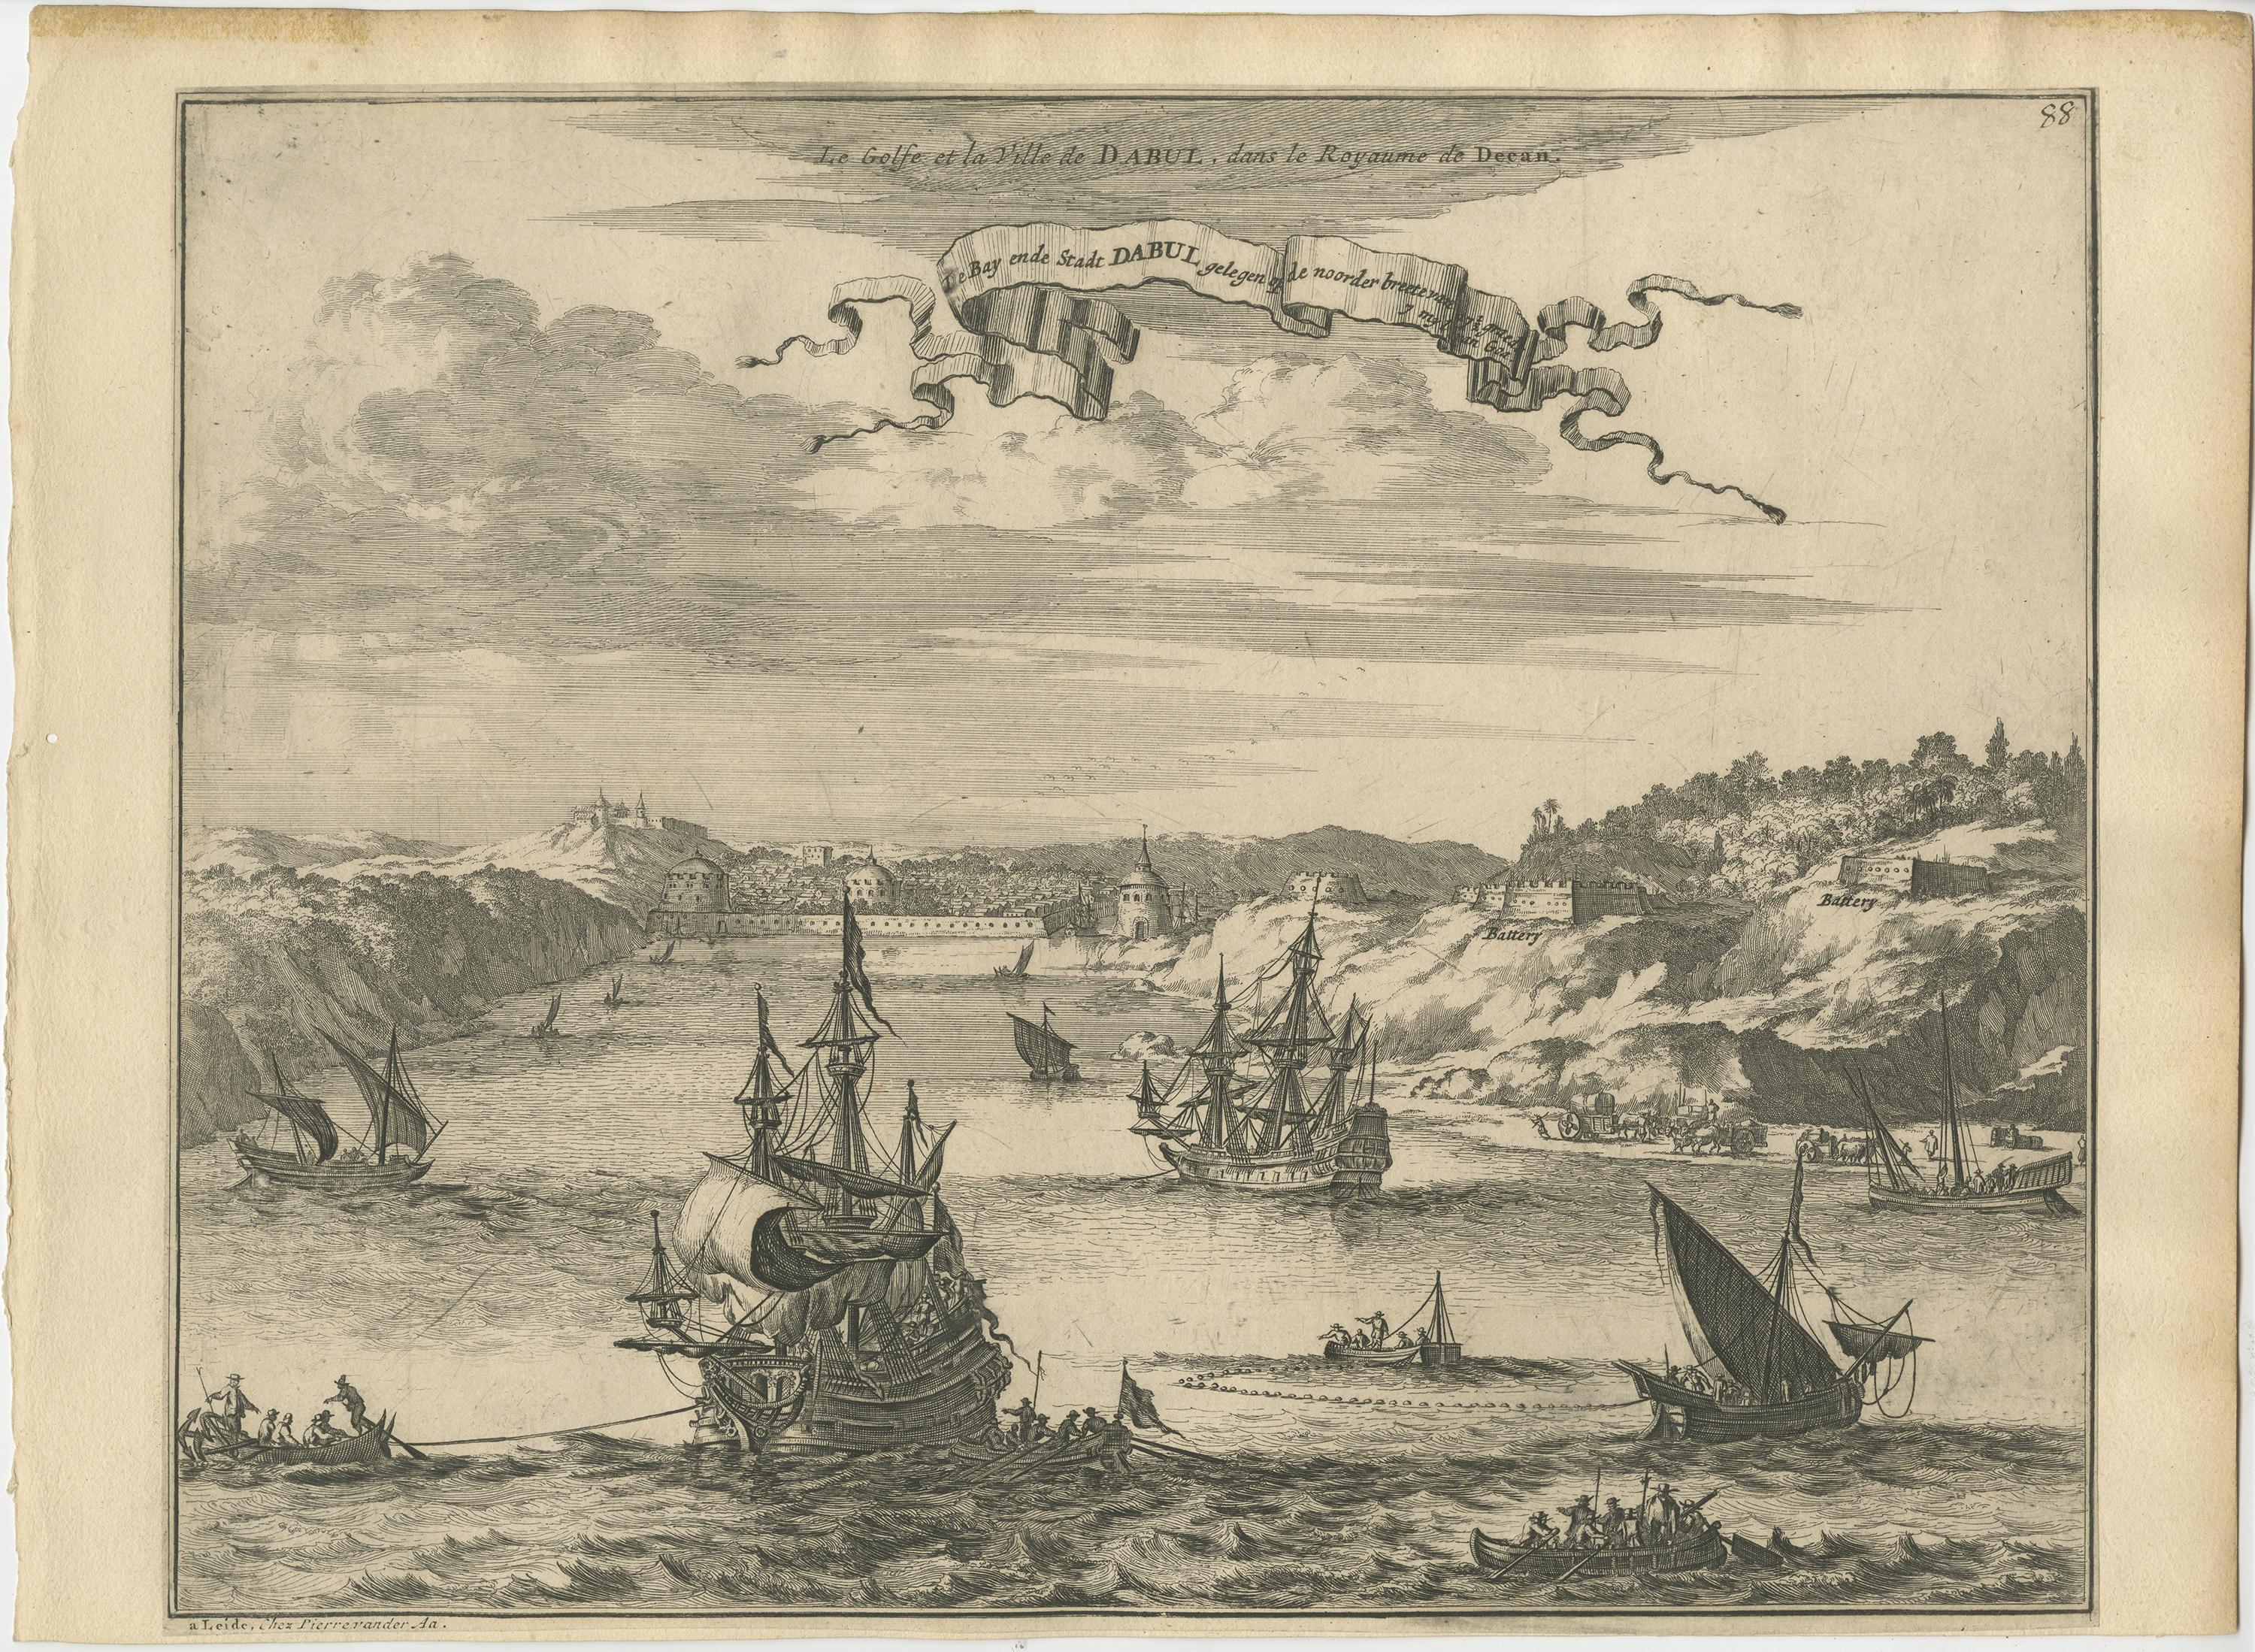 Antique print titled 'De Bay ende Stadt Dabul'. 

Bird's eye view of Dabhol as seen from the sea. The city is situated on the Vashishti river, north of Goa in India, on the Malabar Coast. The view shows merchant and fishing ships, as well as a